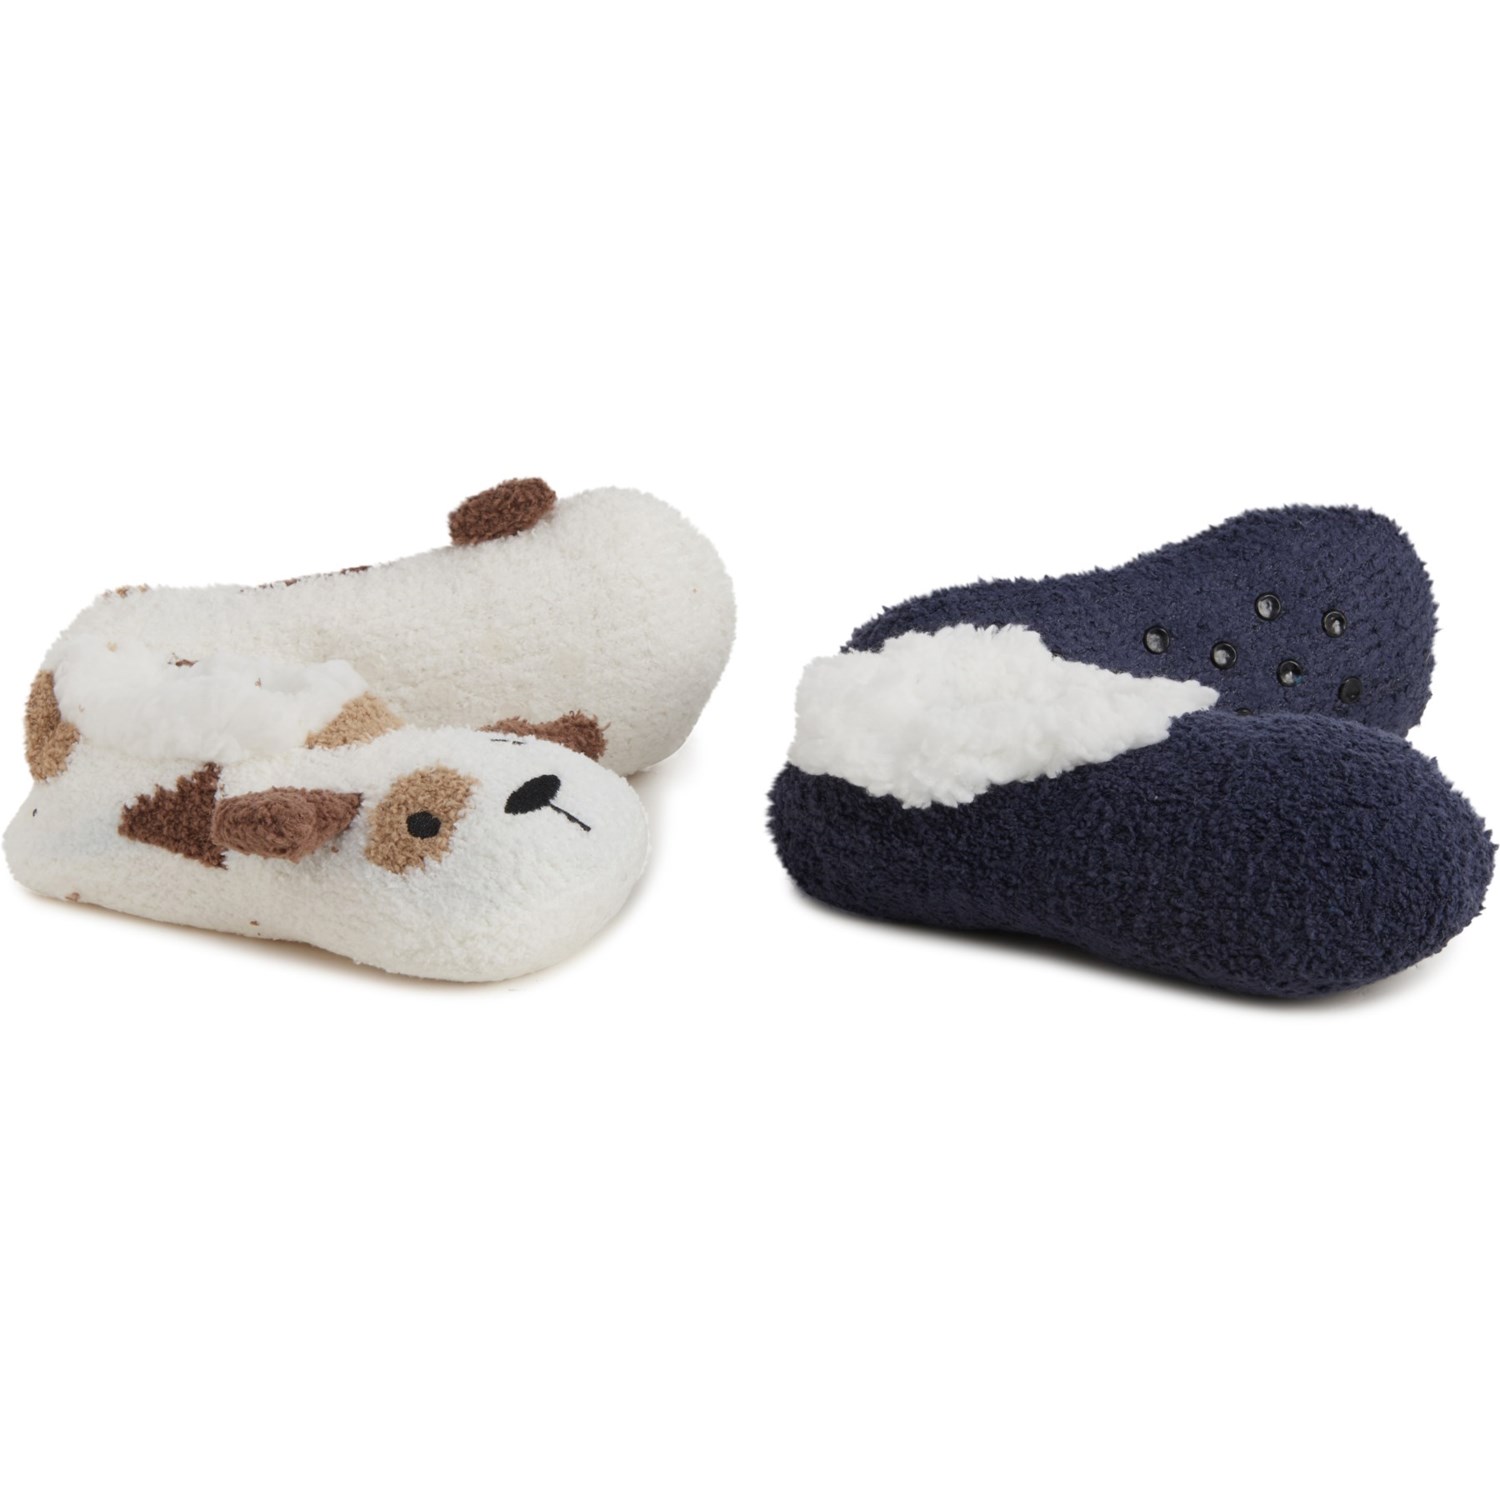 Cuddl Duds Fleece Slippers - 2-Pack (For Boys)